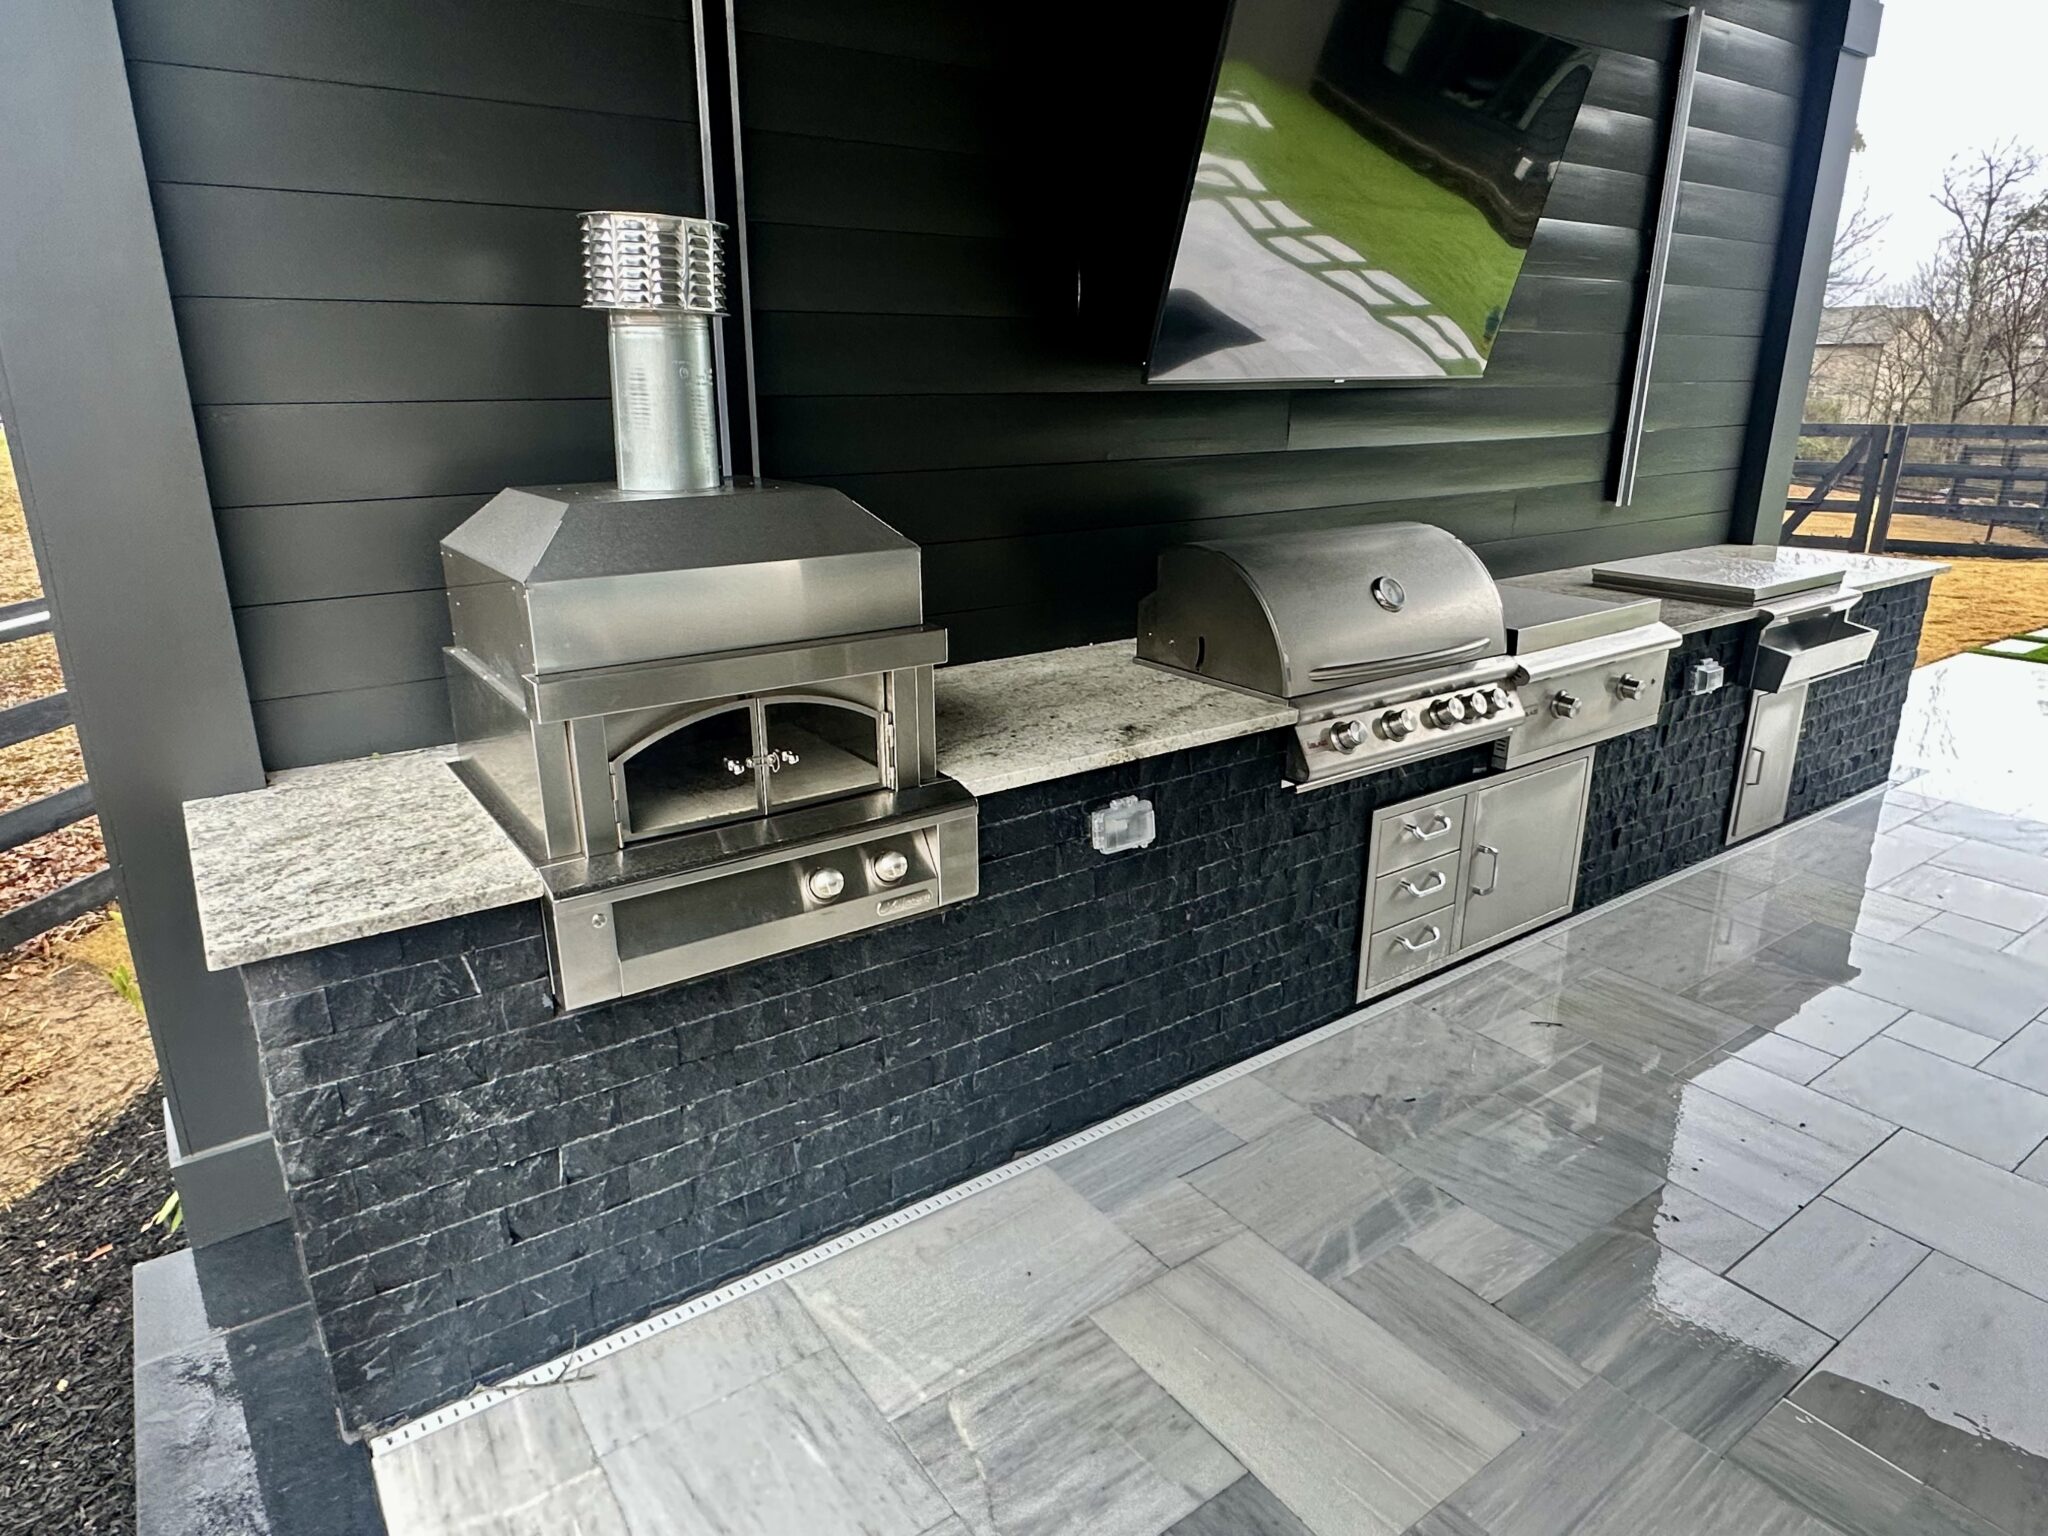 Modern outdoor kitchen with a pizza oven, grill, fridge, sink, and television under a cabana